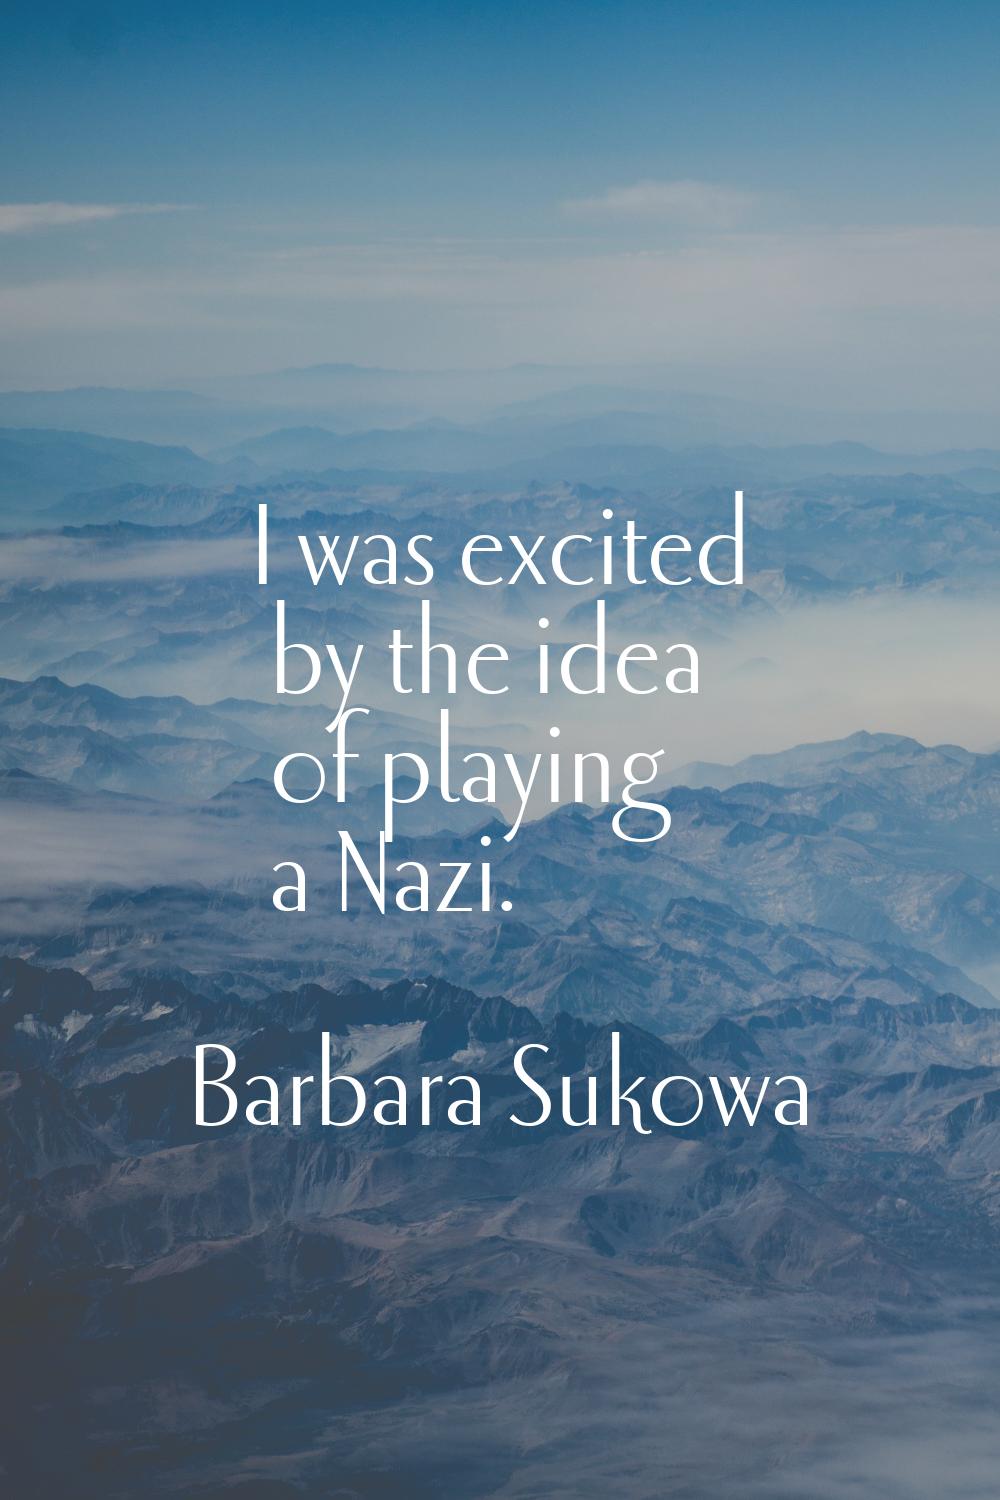 I was excited by the idea of playing a Nazi.